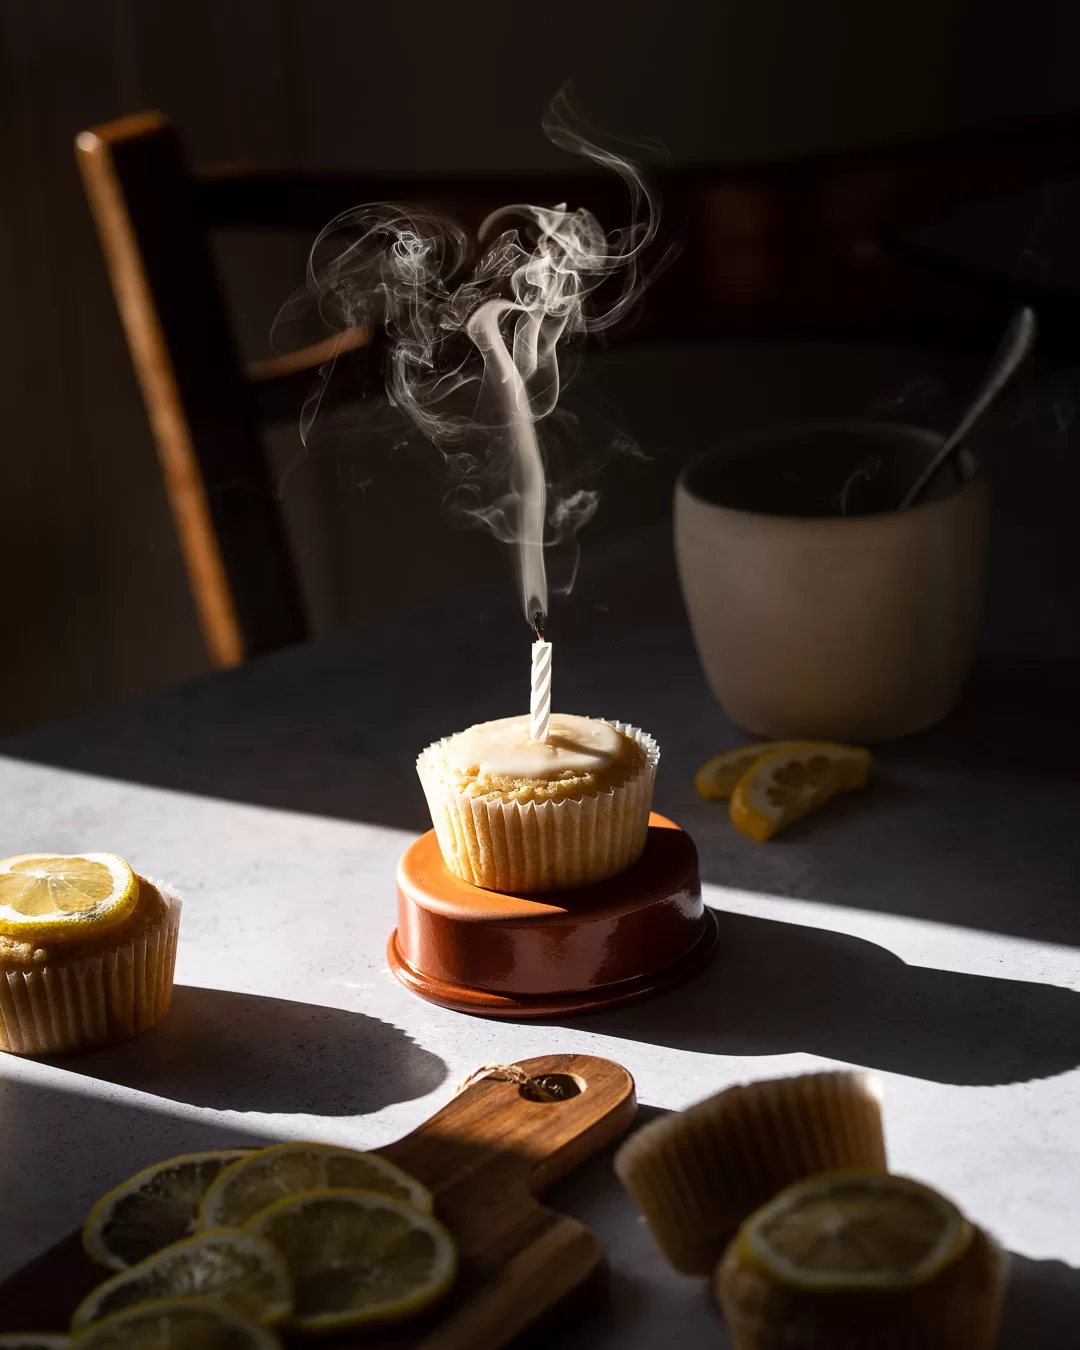 Food photo of lemon cupcake with icing and smoke from candle